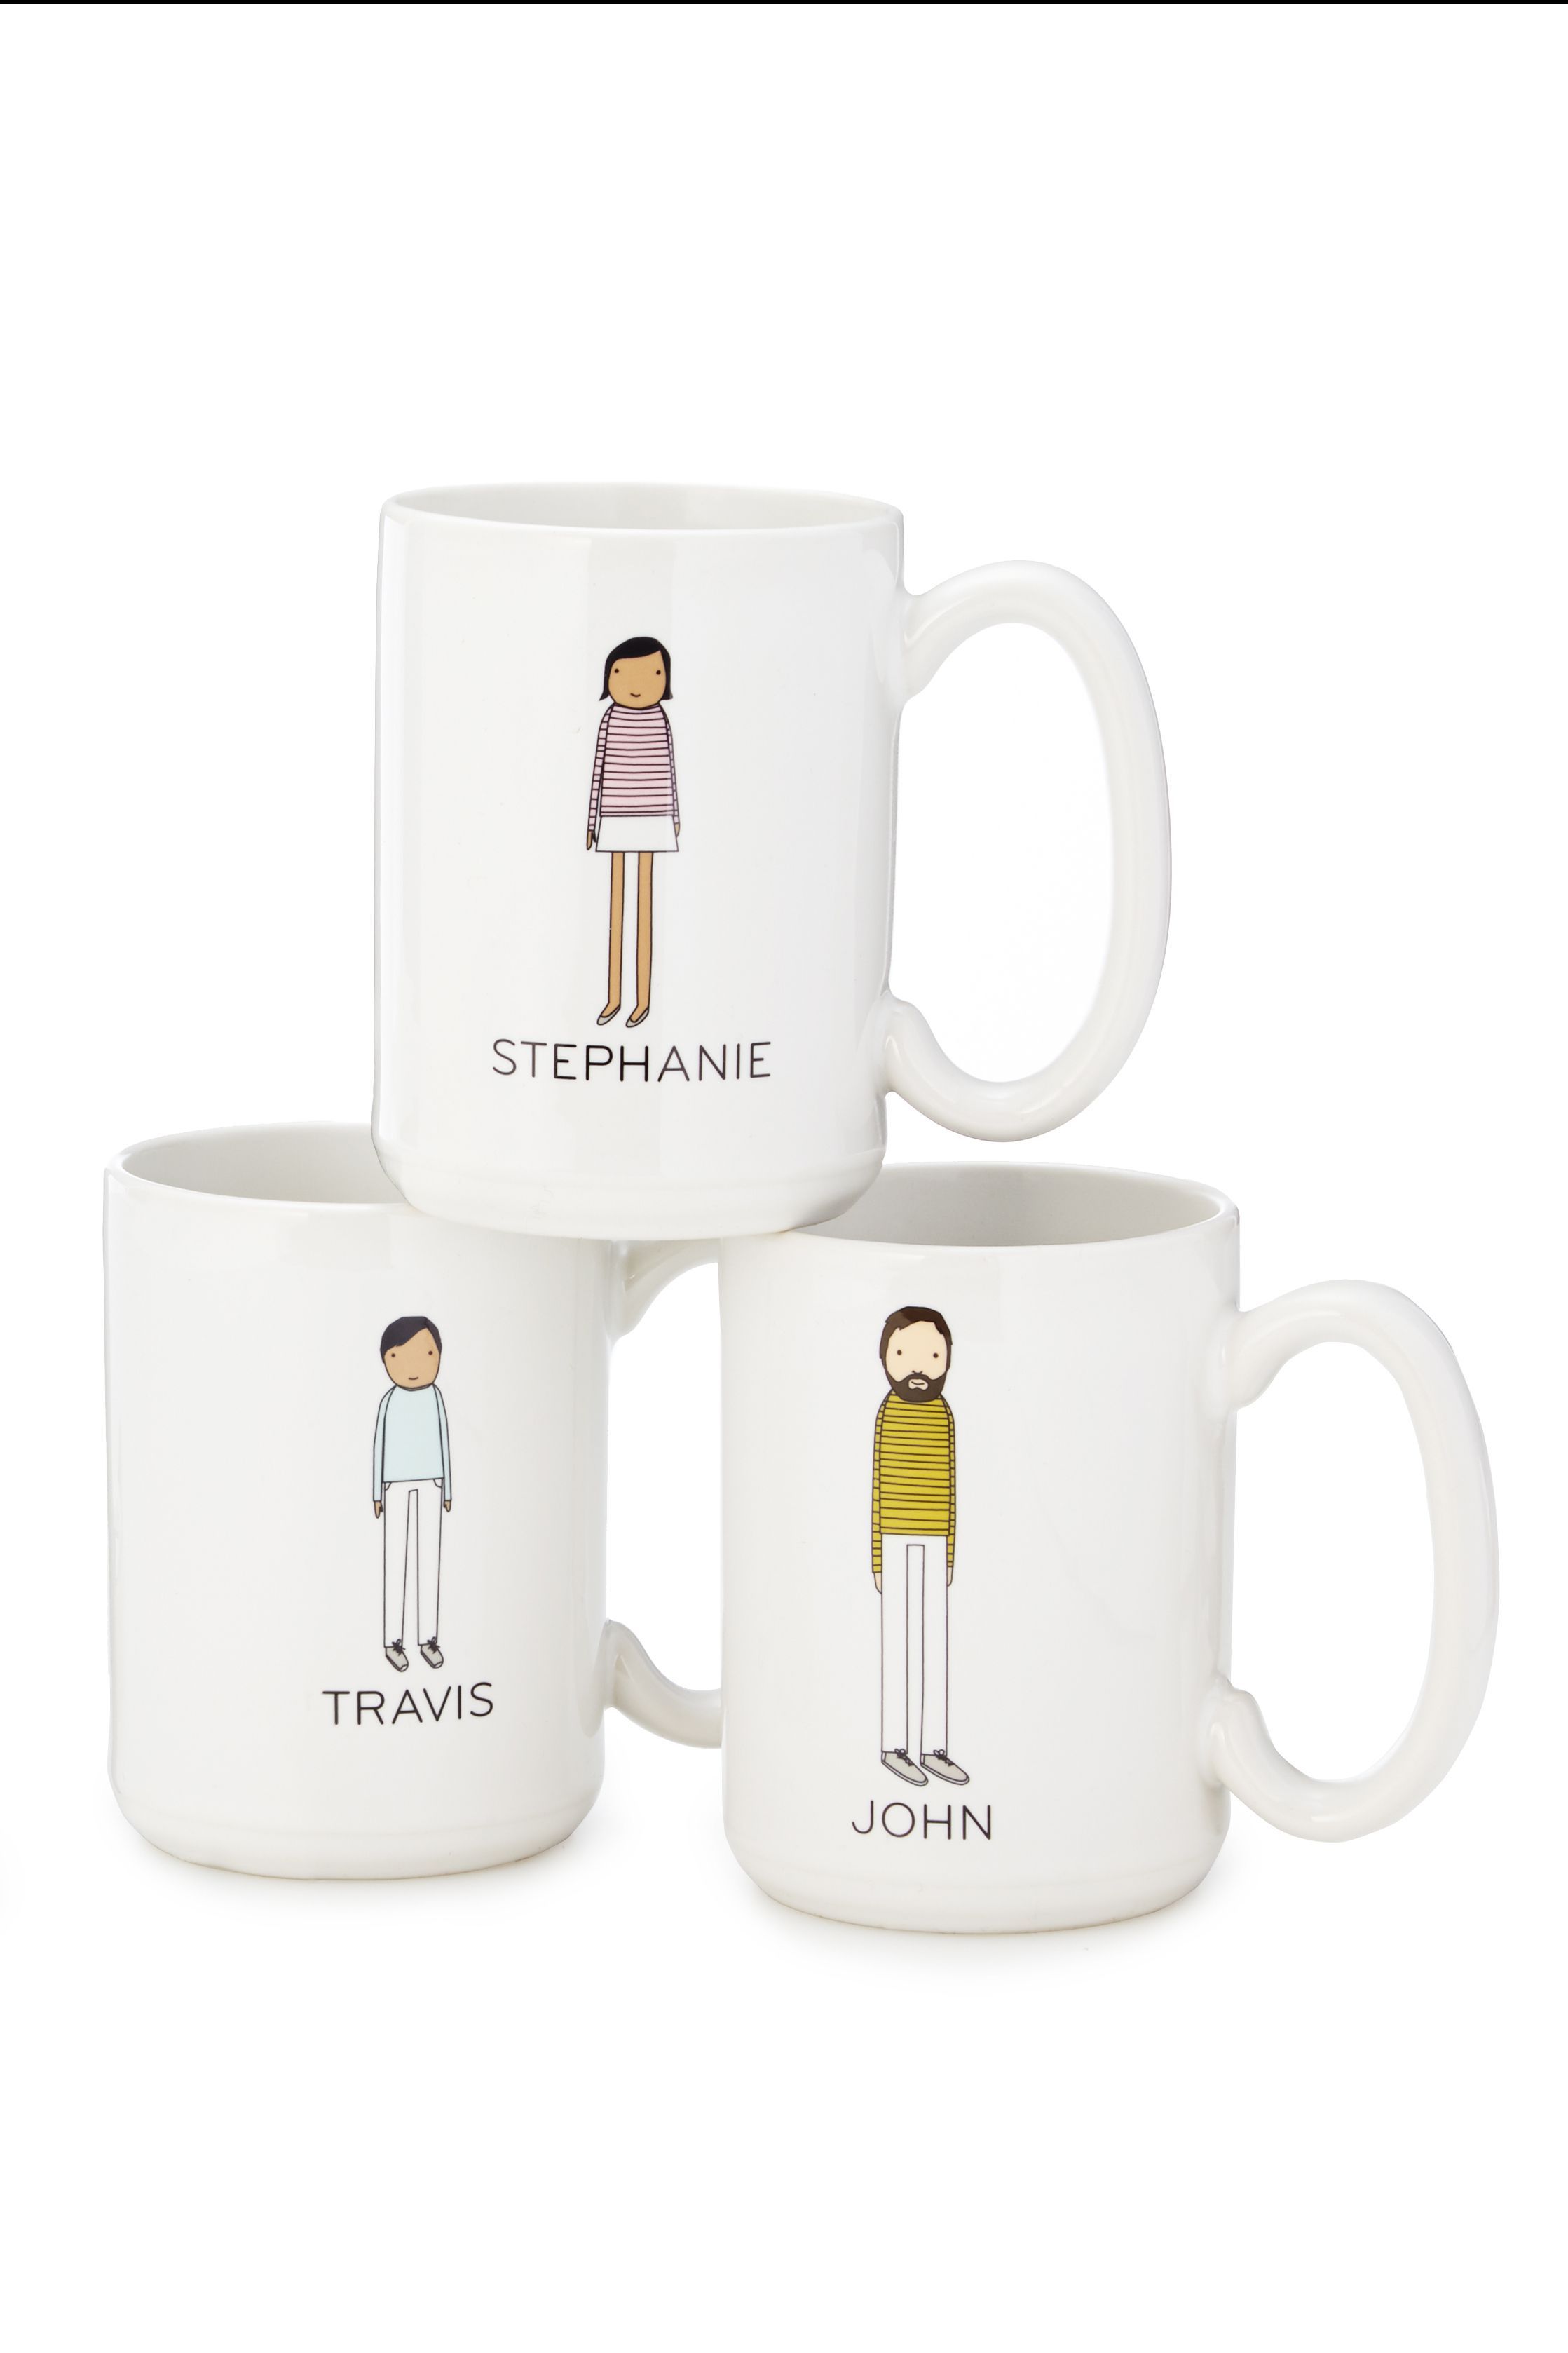 Your Name On A Mug Fun Coffee Cup Personalised Gift birthday present HIS HER 